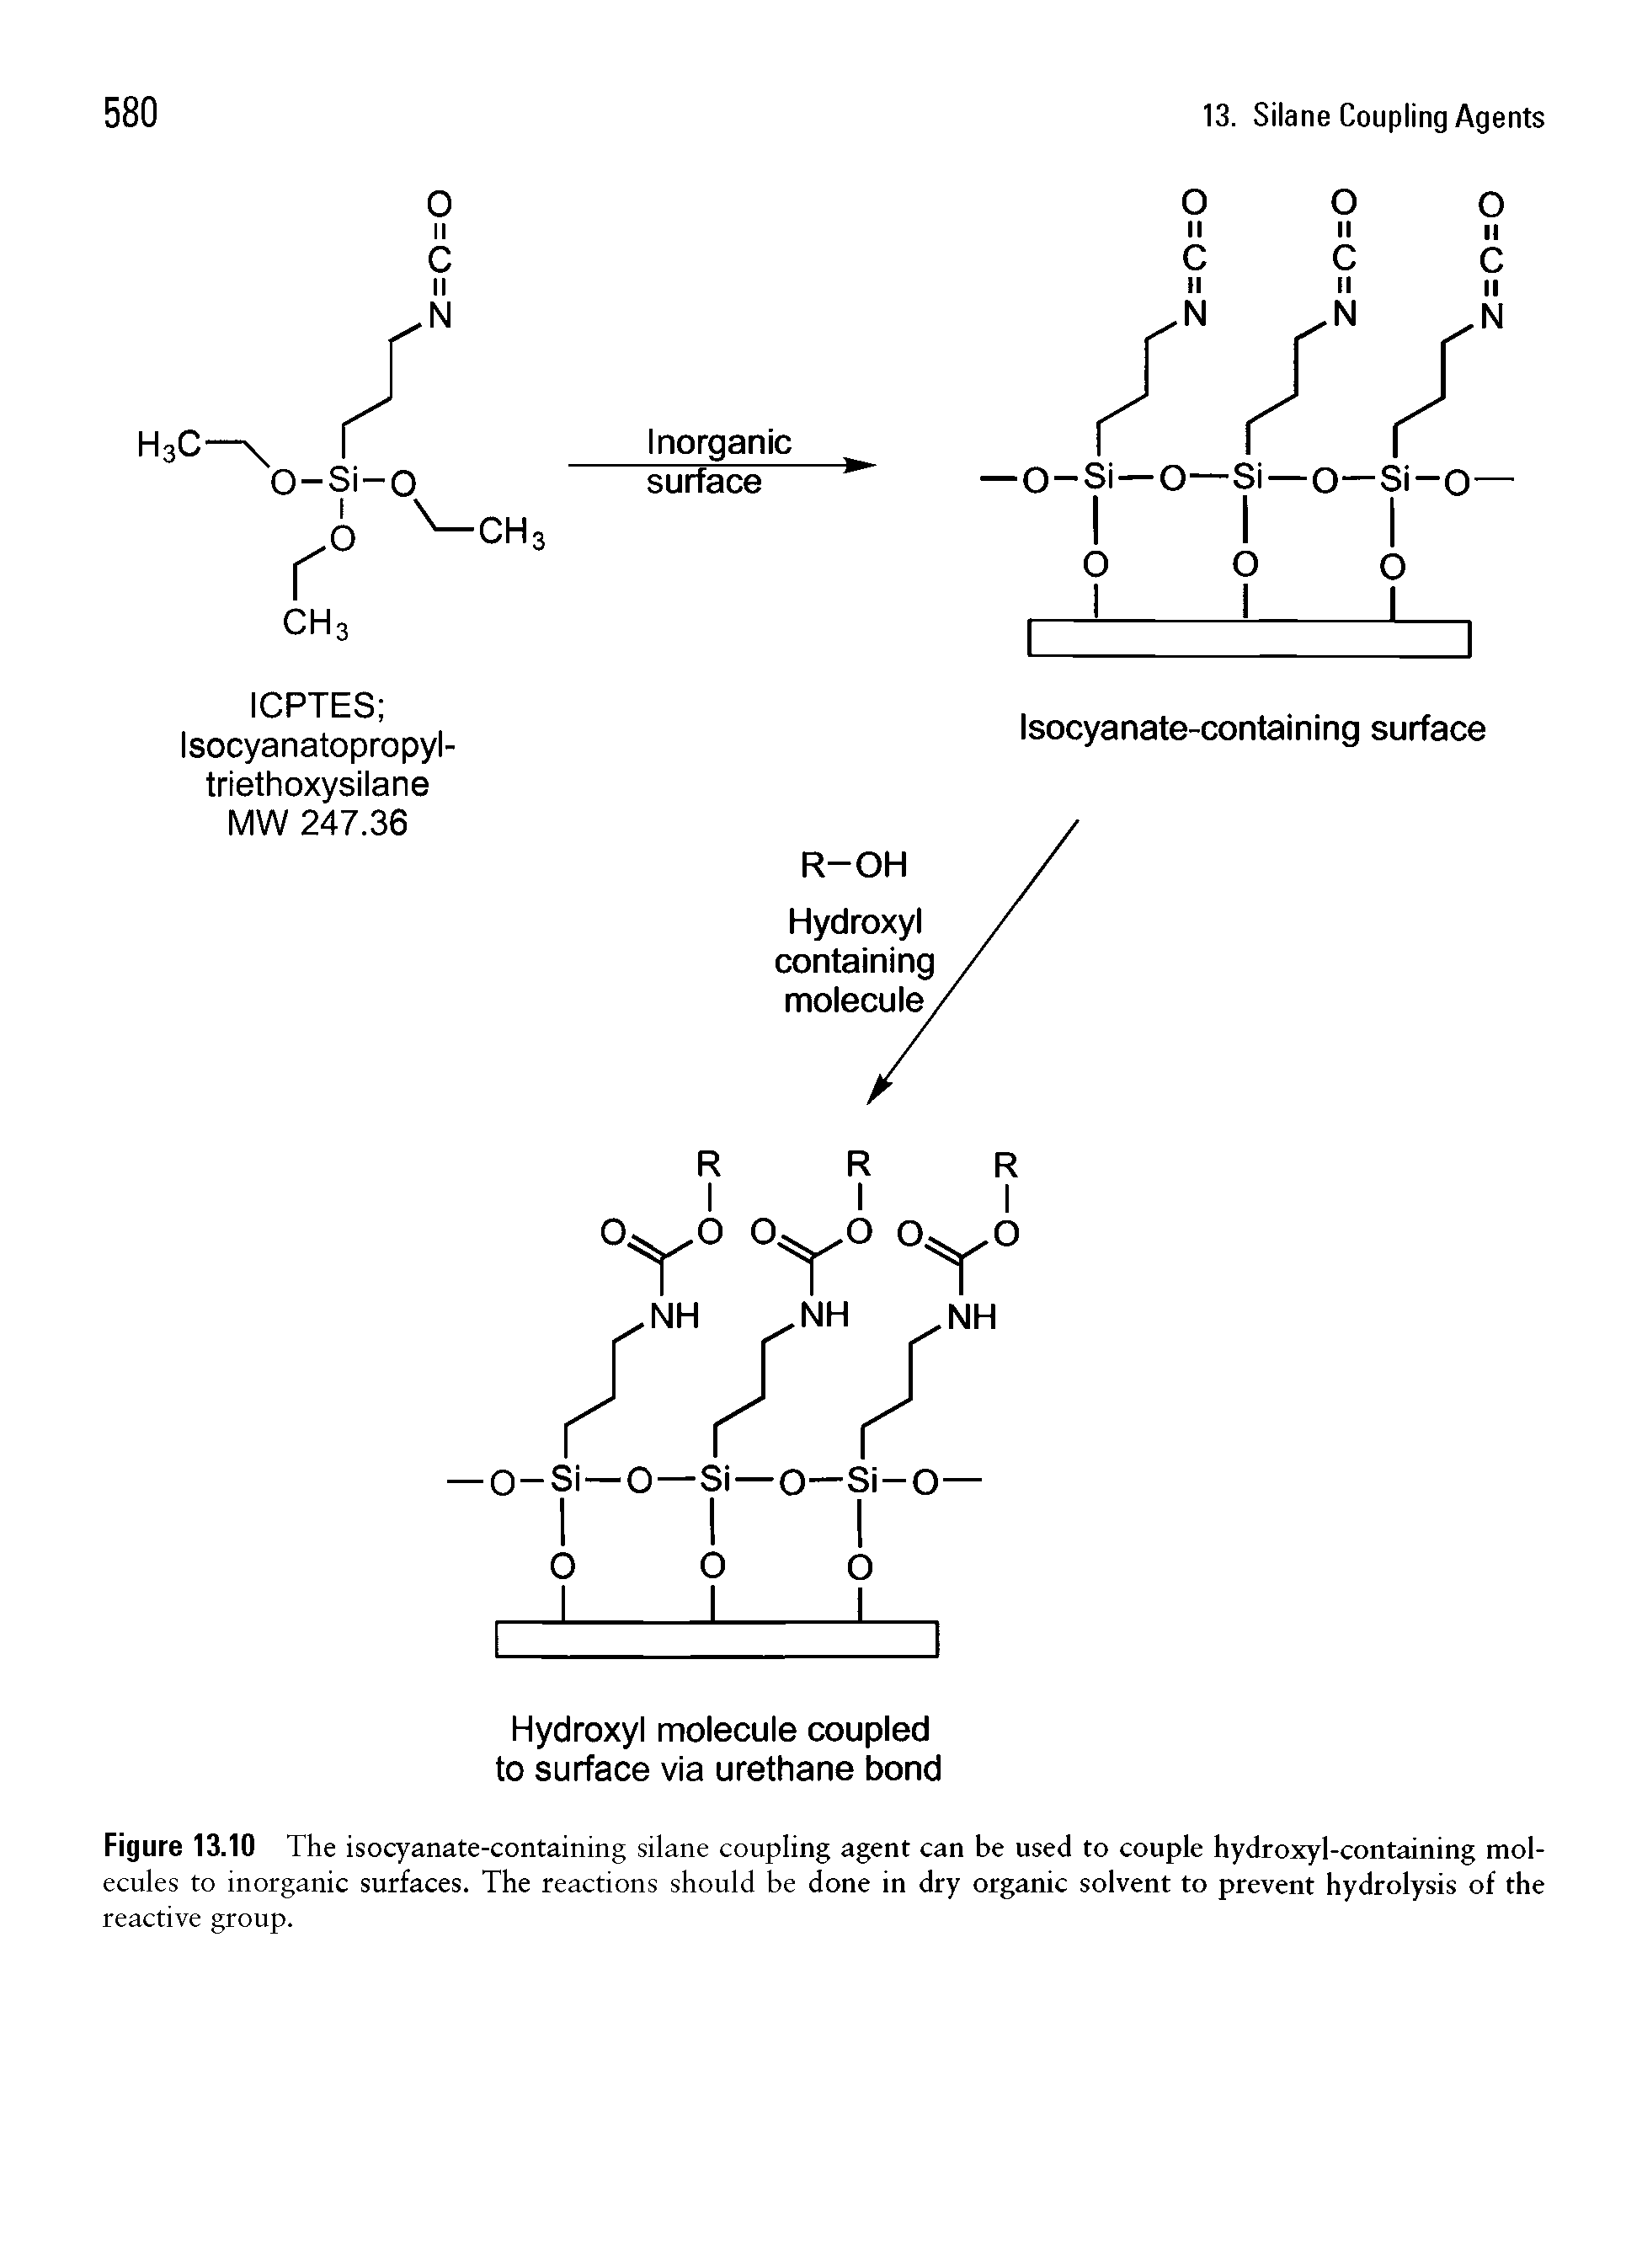 Figure 13.10 The isocyanate-containing silane coupling agent can be used to couple hydroxyl-containing molecules to inorganic surfaces. The reactions should be done in dry organic solvent to prevent hydrolysis of the reactive group.